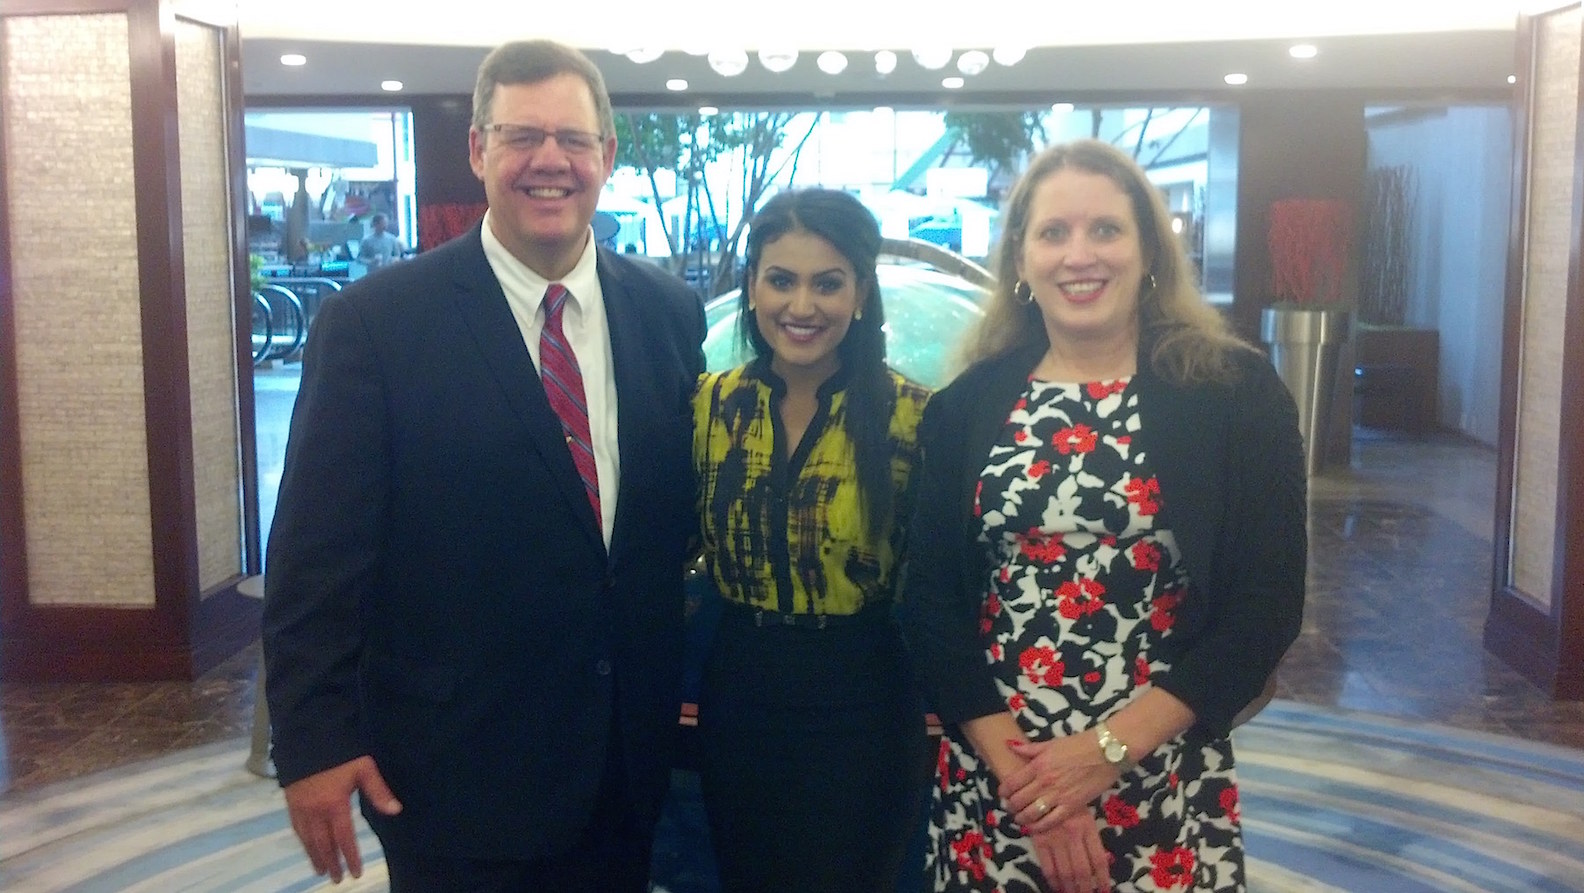 Mike and Deb with Miss America 2014 Nina Davuluri, center, whom Deb arranged to have speak at the Twentieth Century Club on behalf of the Erie County Commission on the Status of Women. Davuluri is from Syracuse.